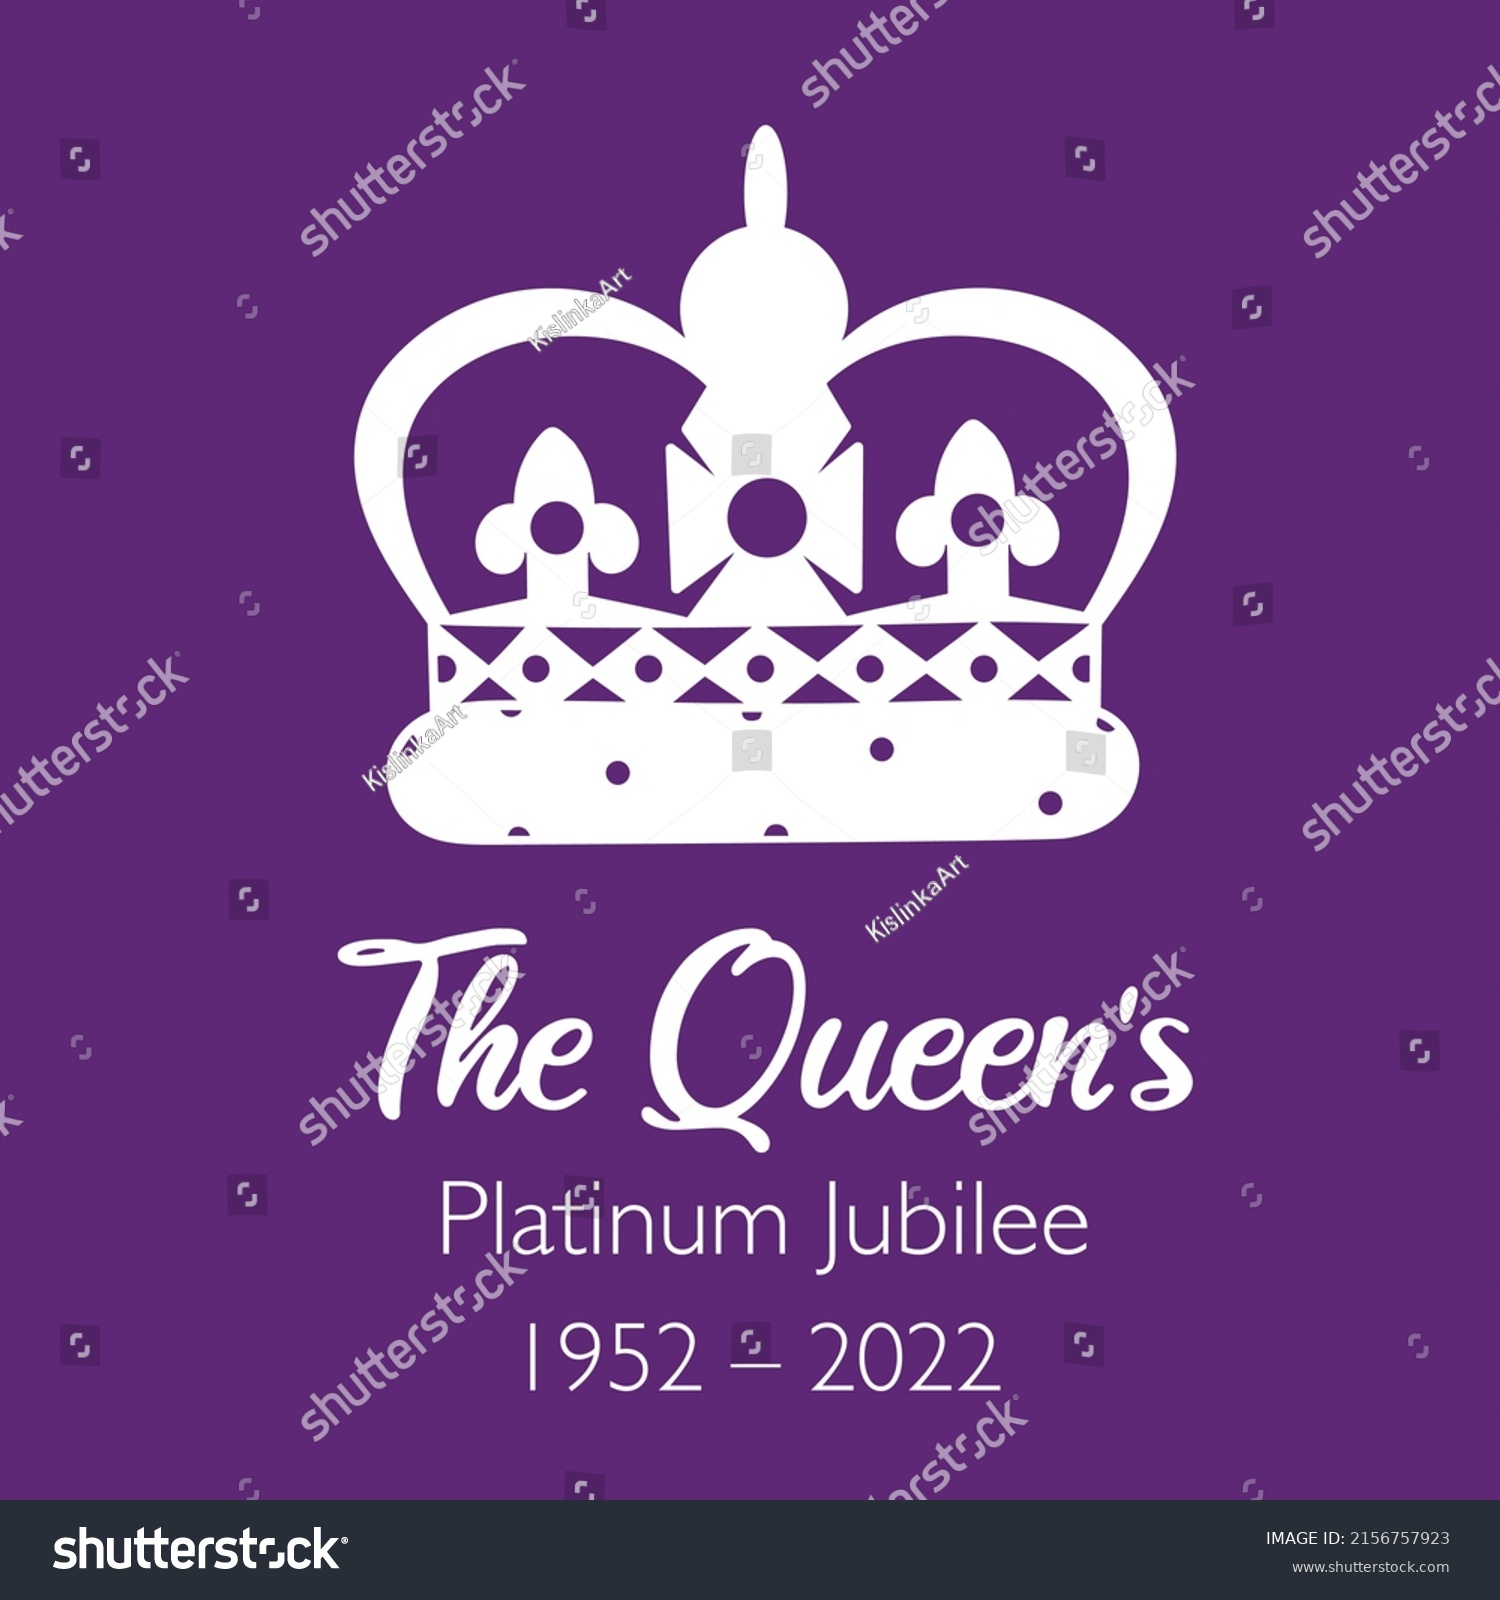 SVG of The Queen's Platinum Jubilee celebration banner Queen Elizabeth’s crown 70 years. Ideal design for banners, flayers, social media, stickers, greeting cards.  svg